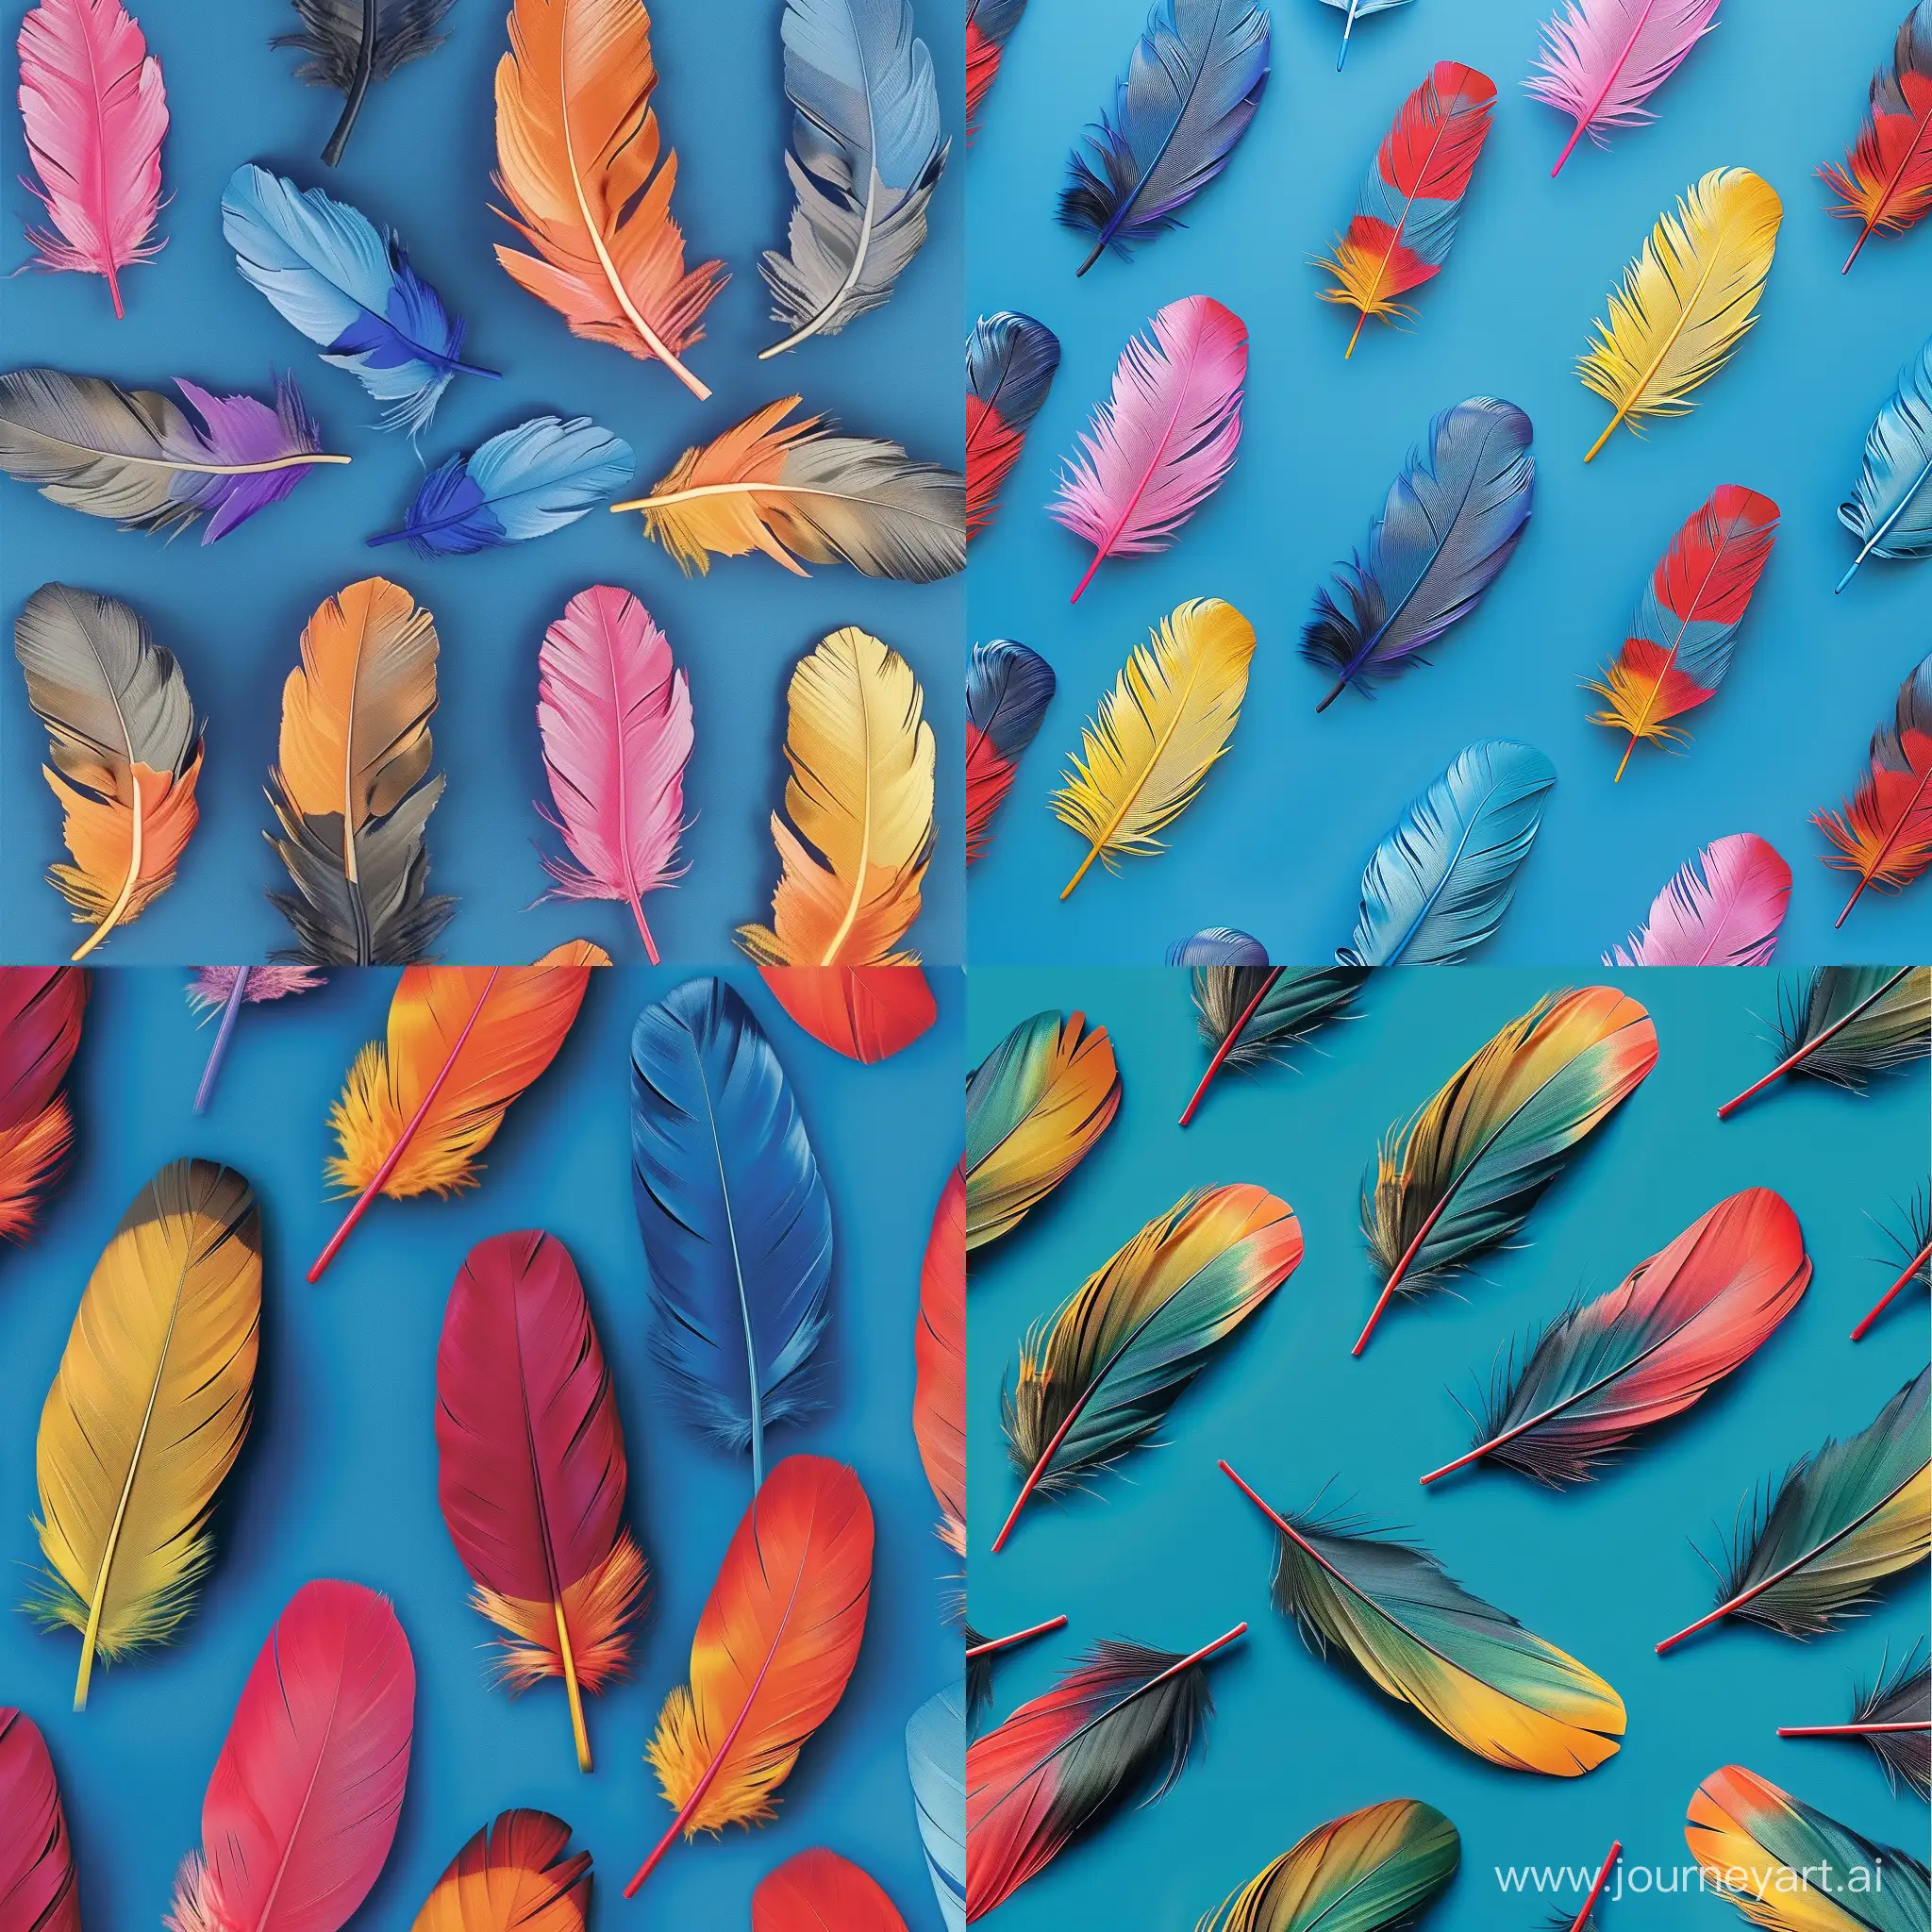 Vibrant-Multicolored-Feathers-Pattern-on-Blue-Background